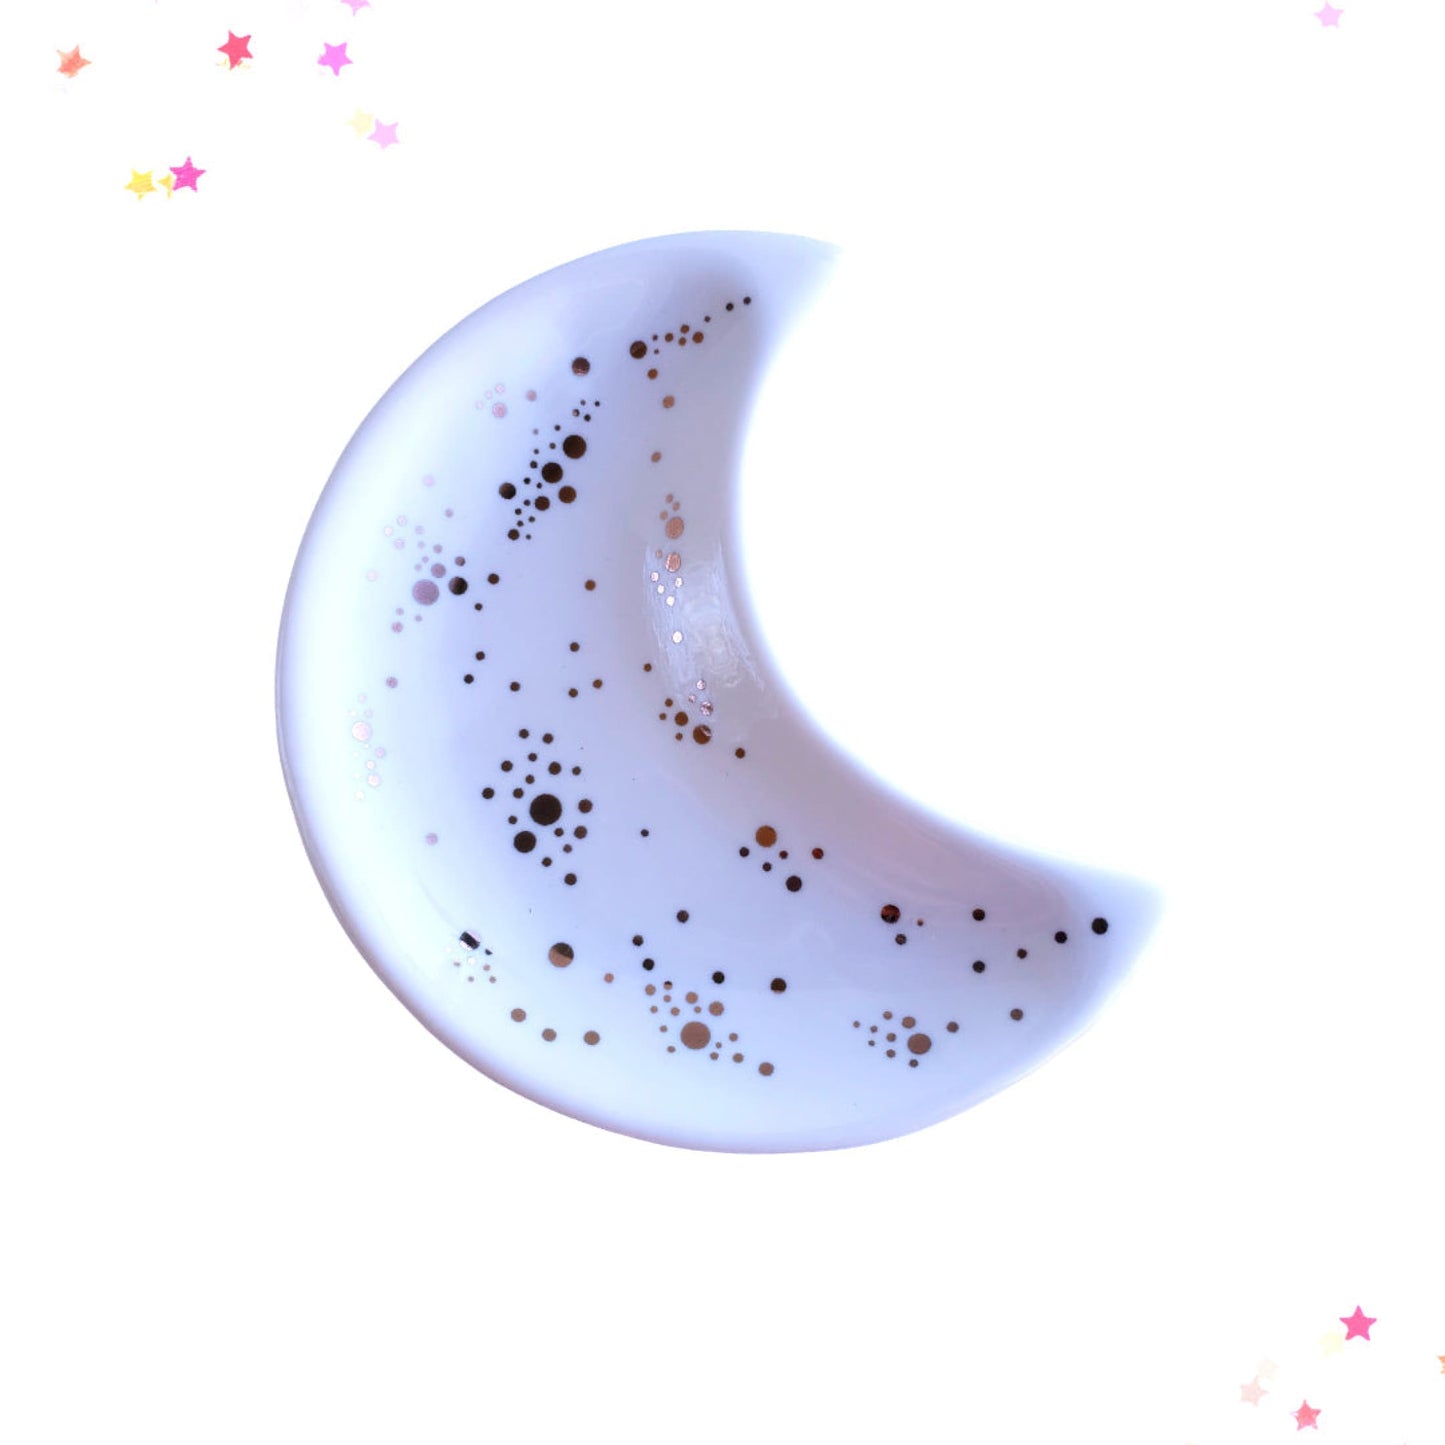 White Moon Ceramic Trinket Dish from Confetti Kitty, Only 7.99